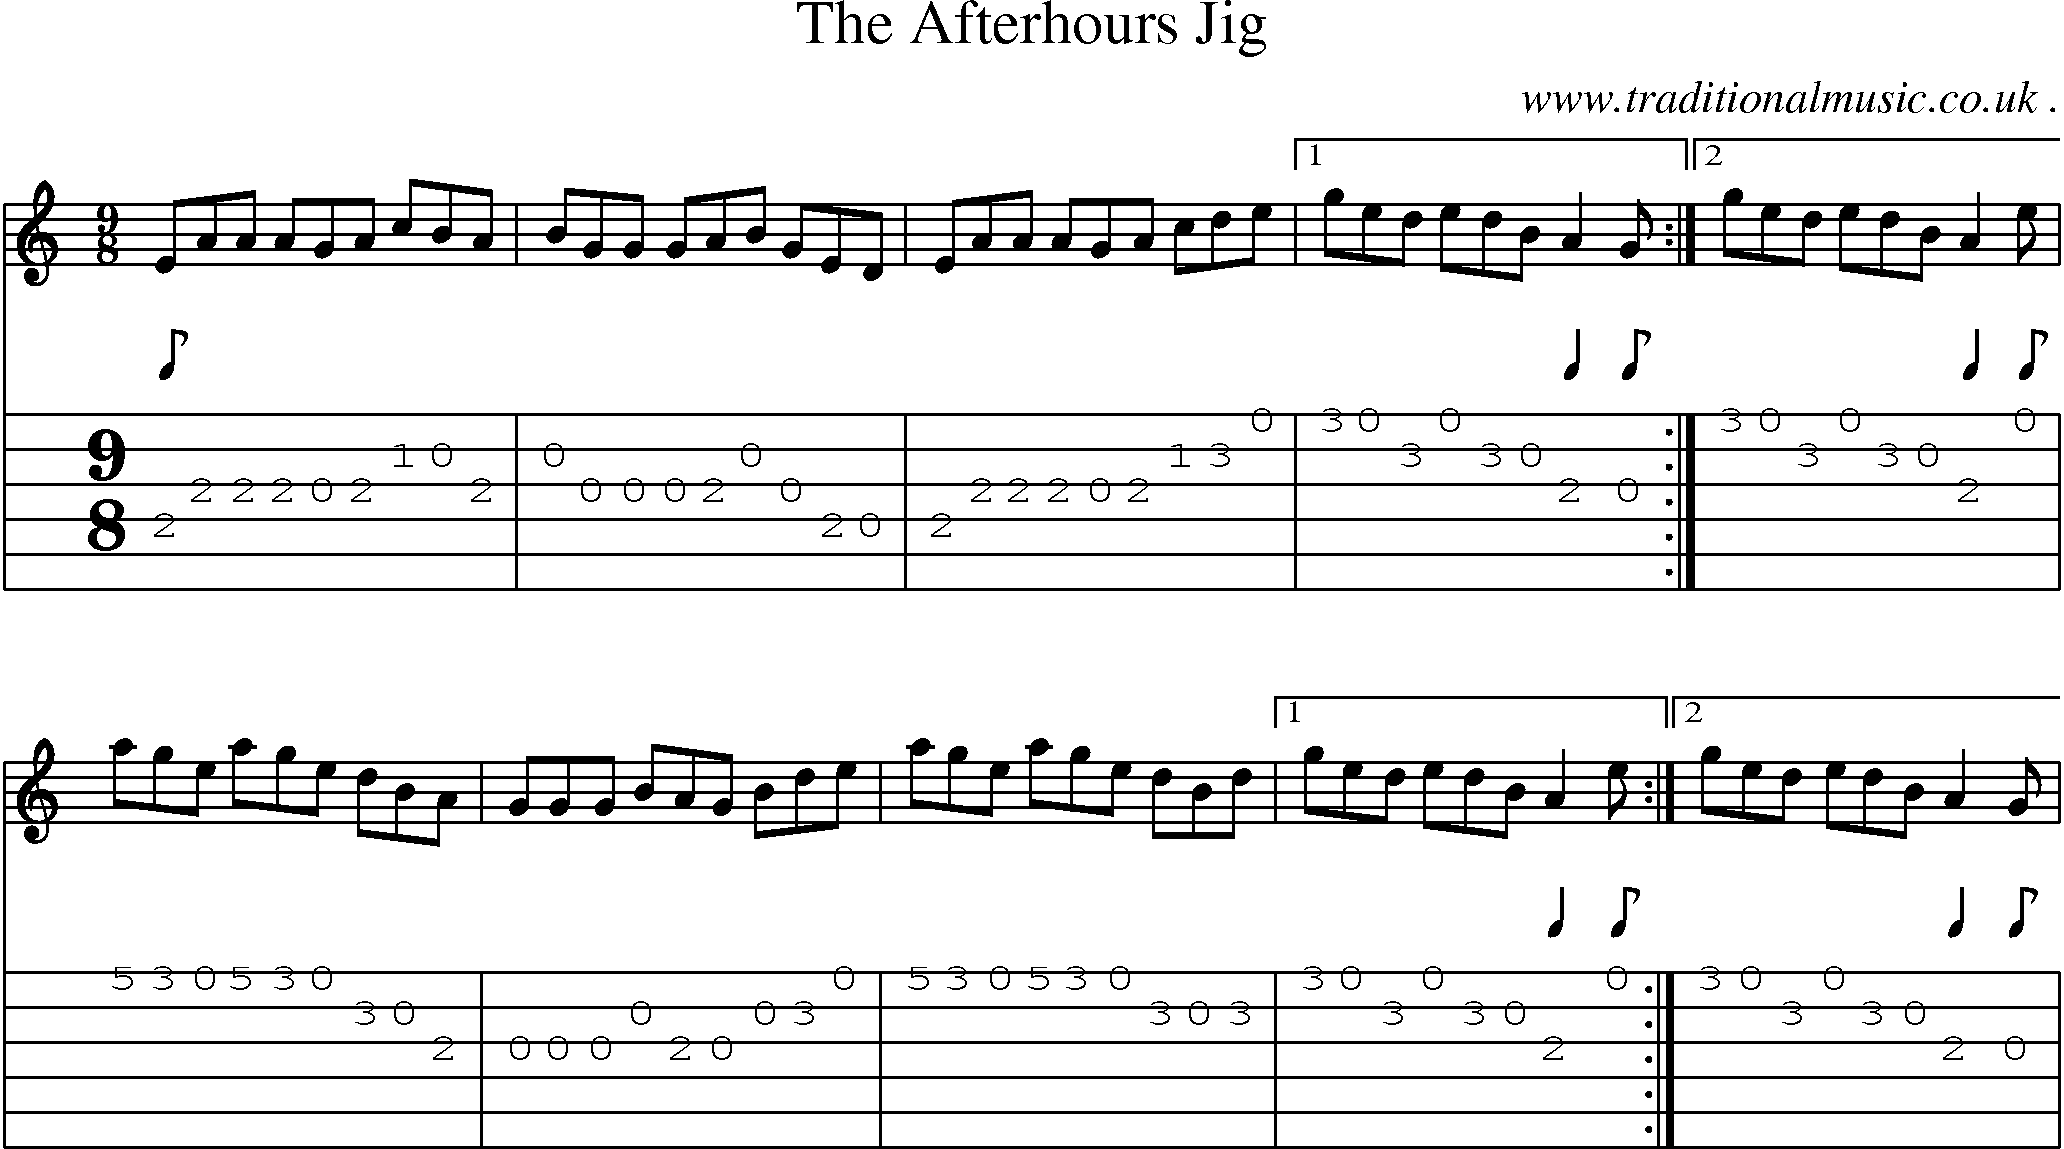 Sheet-Music and Guitar Tabs for The Afterhours Jig